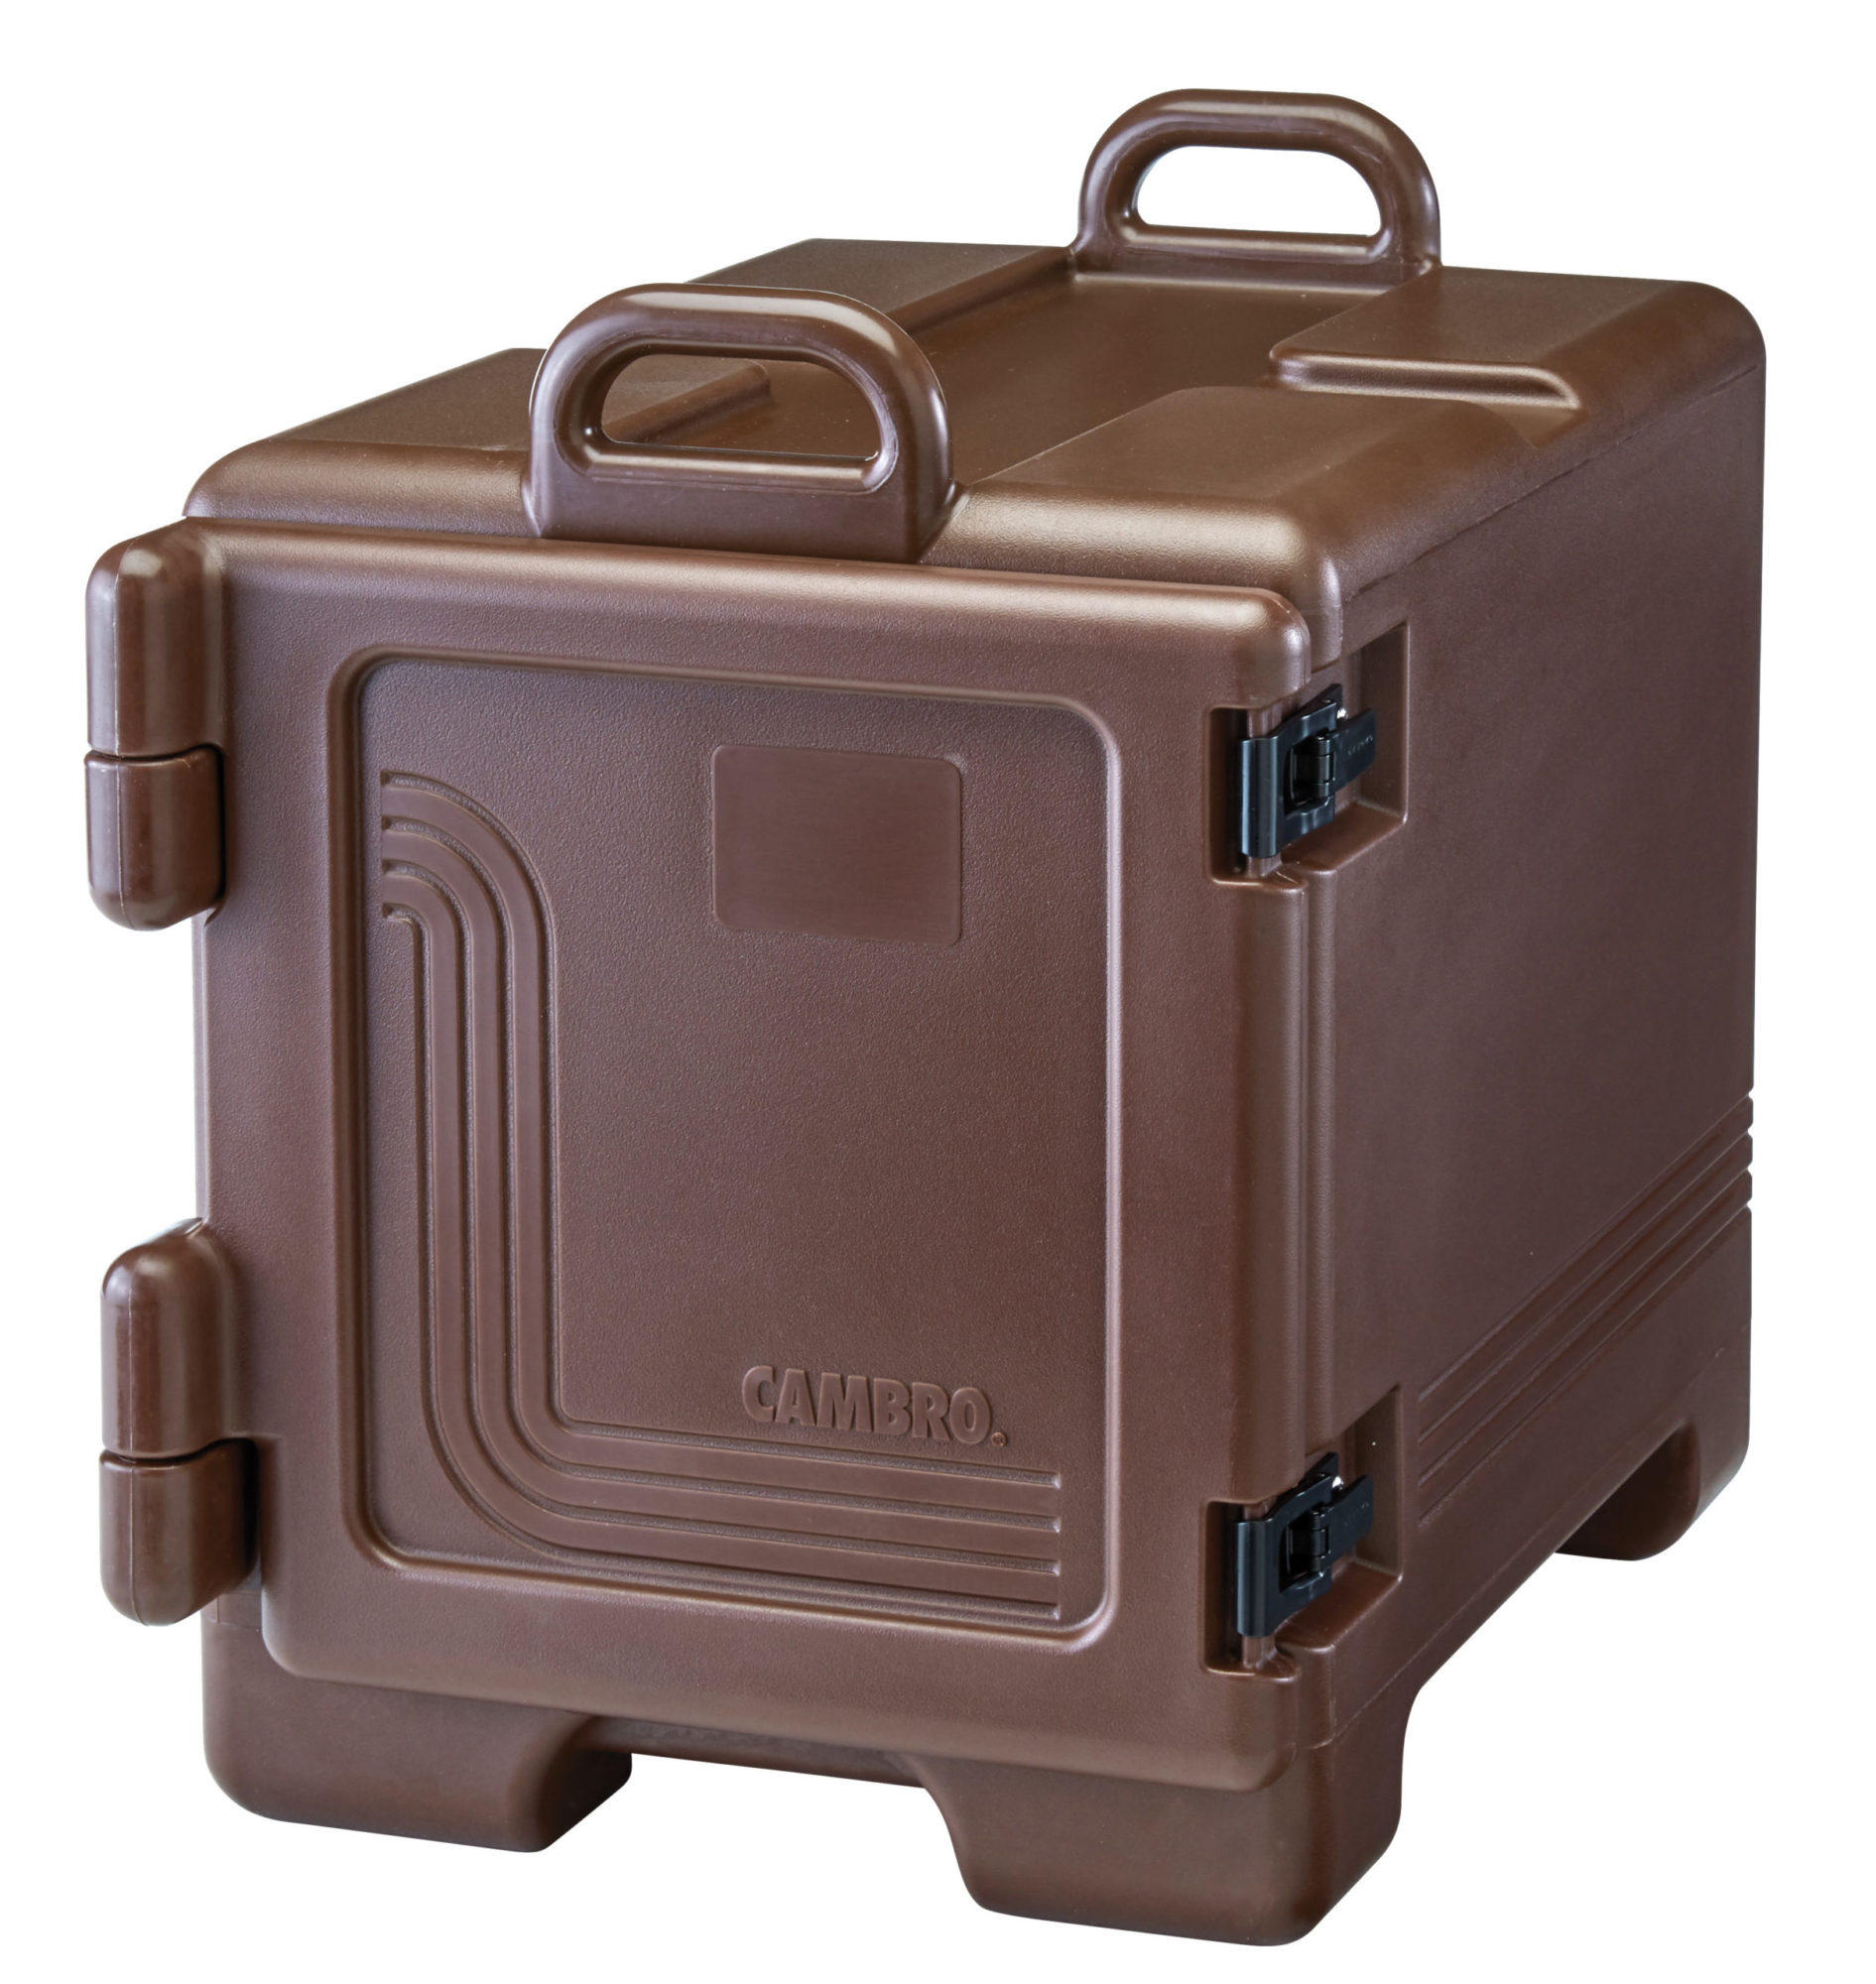 Cambro Brown Front Loading Insulated Food Pan Carrier with Handles - 4 Pan Capacity